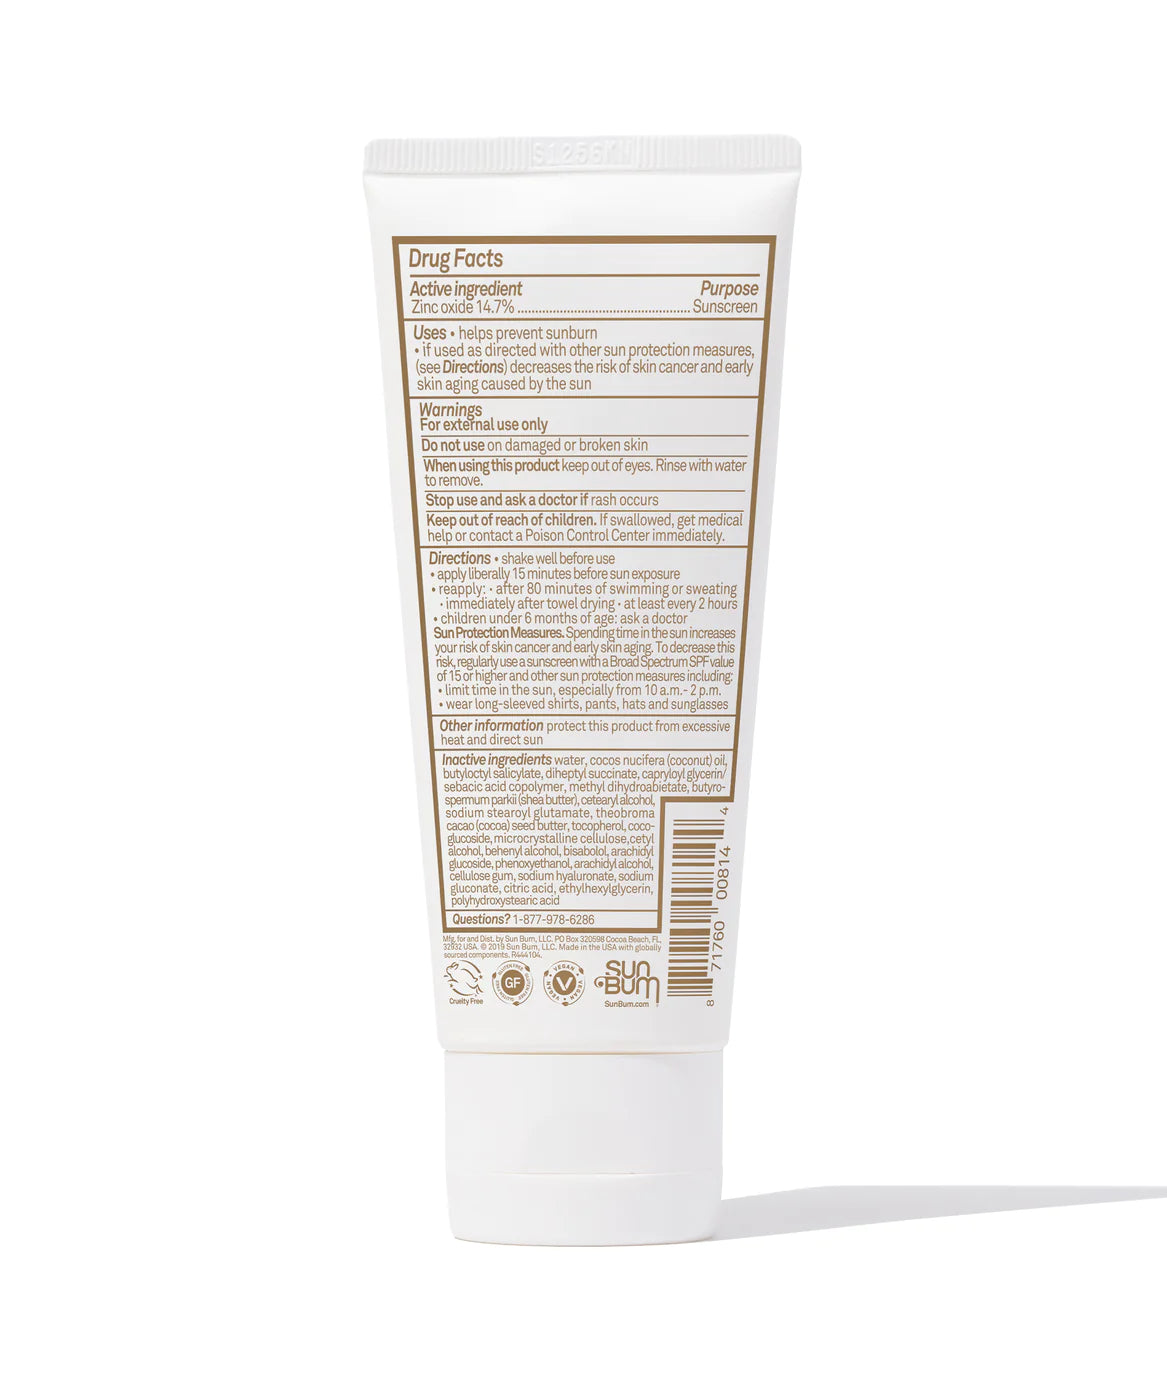 Mineral Sunscreen Lotion - SPF 30 - 3 oz